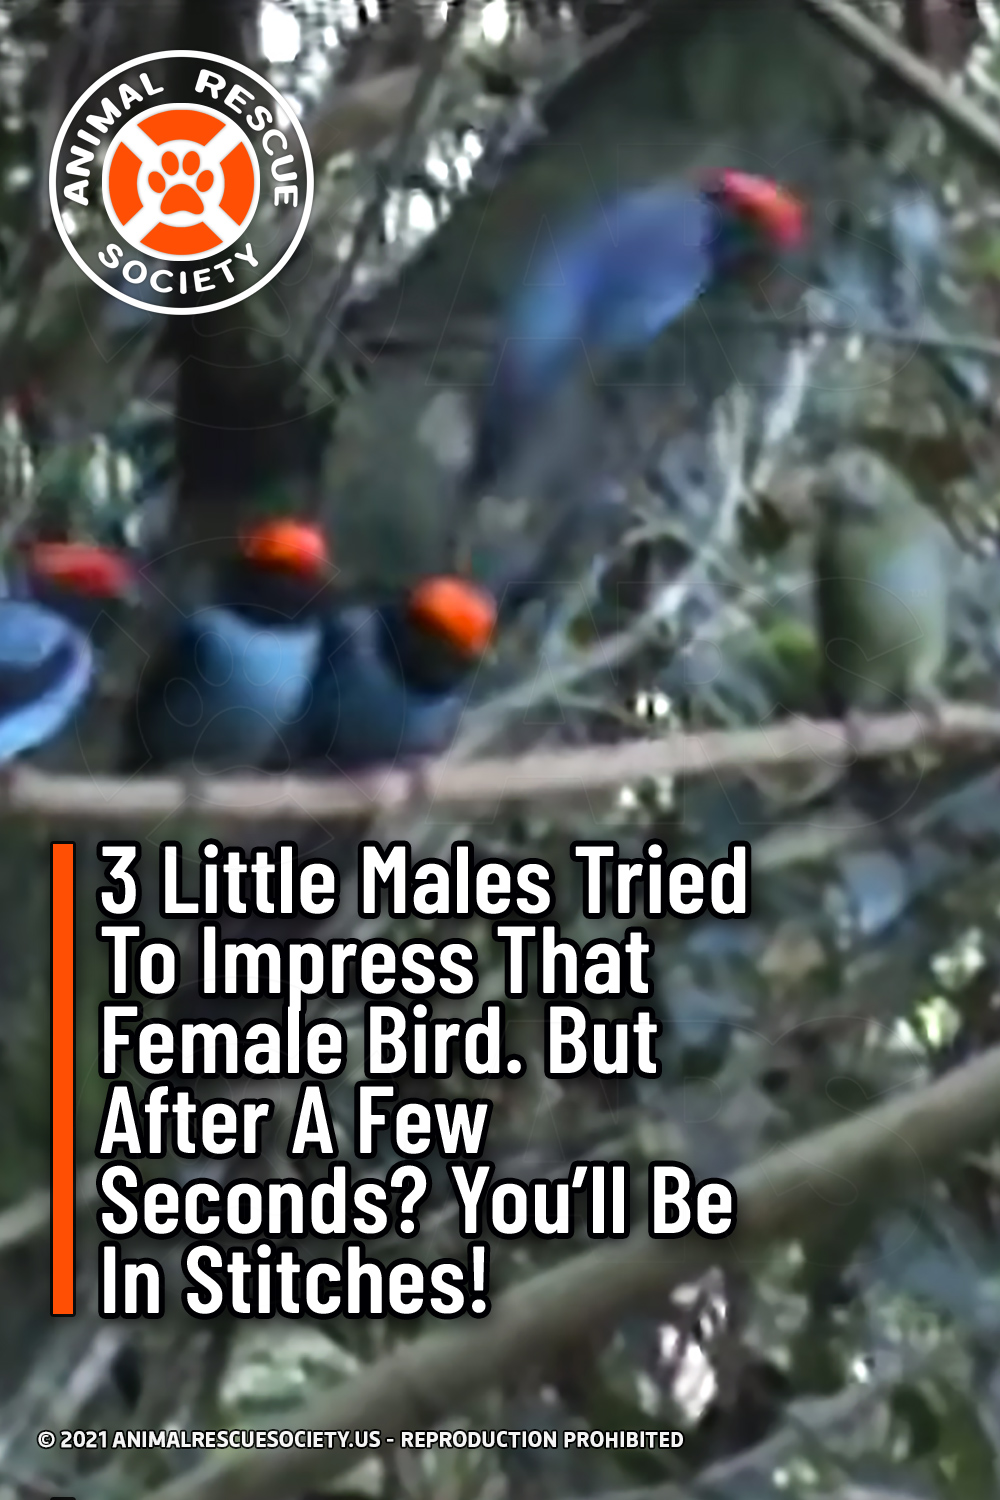 3 Little Males Tried To Impress That Female Bird. But After A Few Seconds? You’ll Be In Stitches!